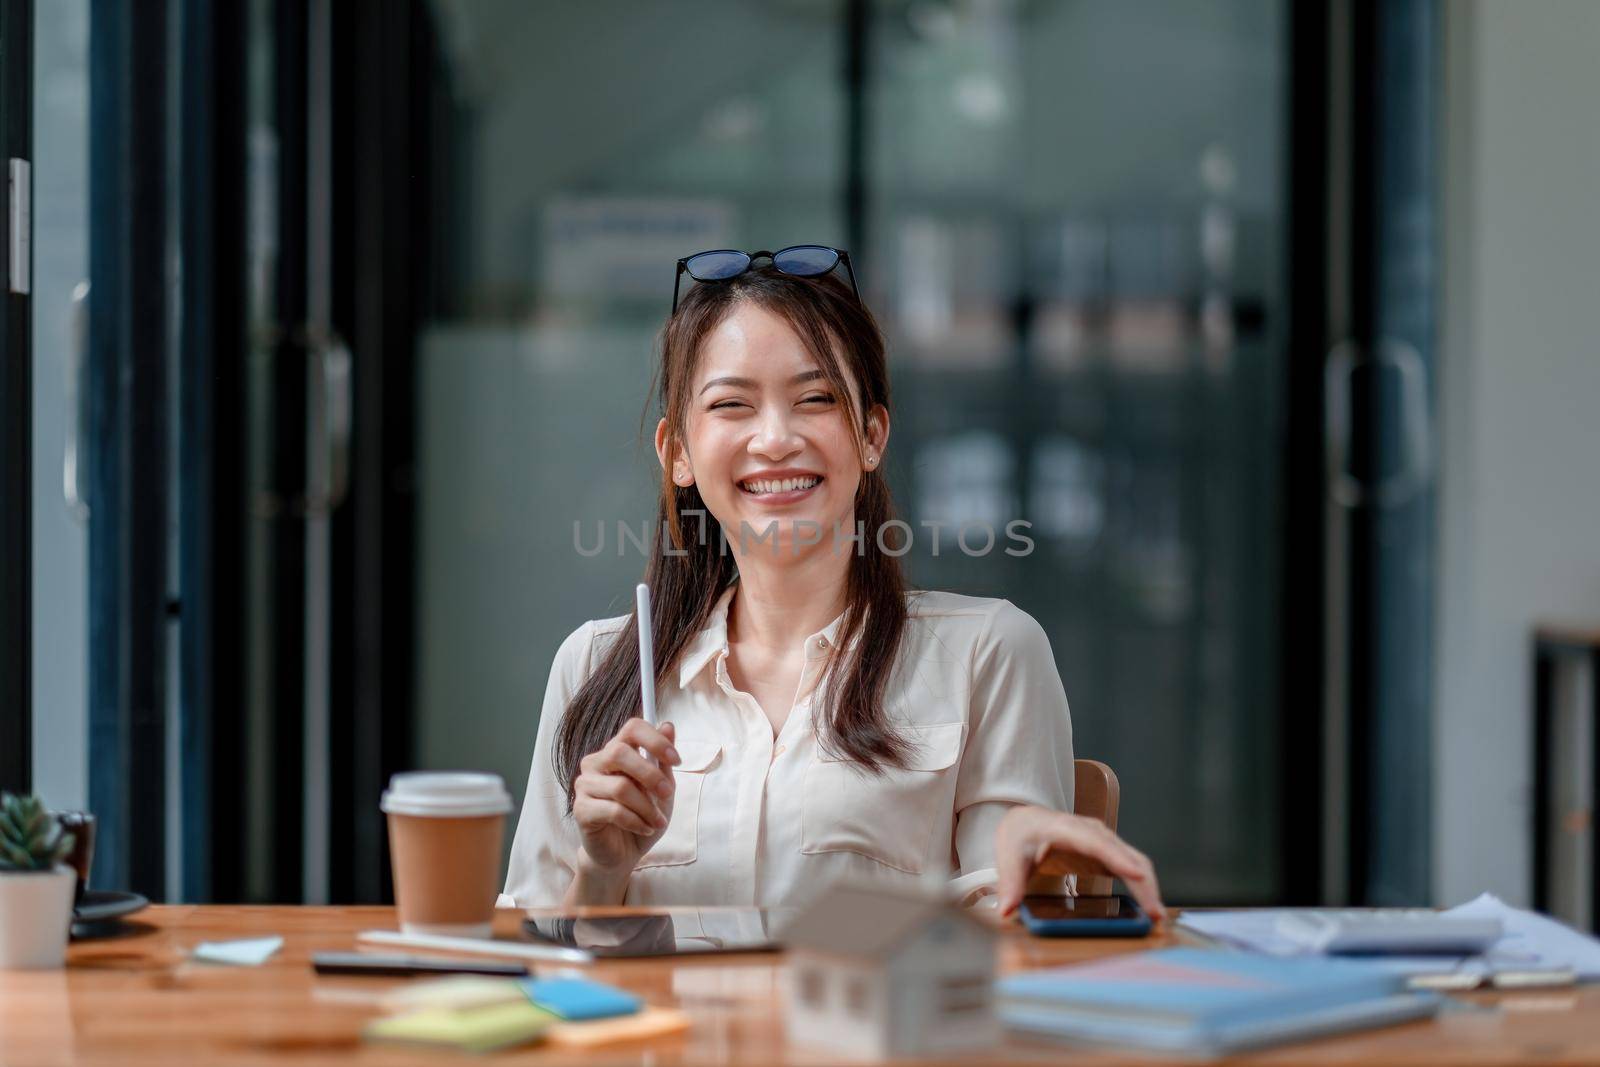 Portrait of happy young asian girl working at a coffee shop with a digital tablet and pen stylus. Real estate concept.